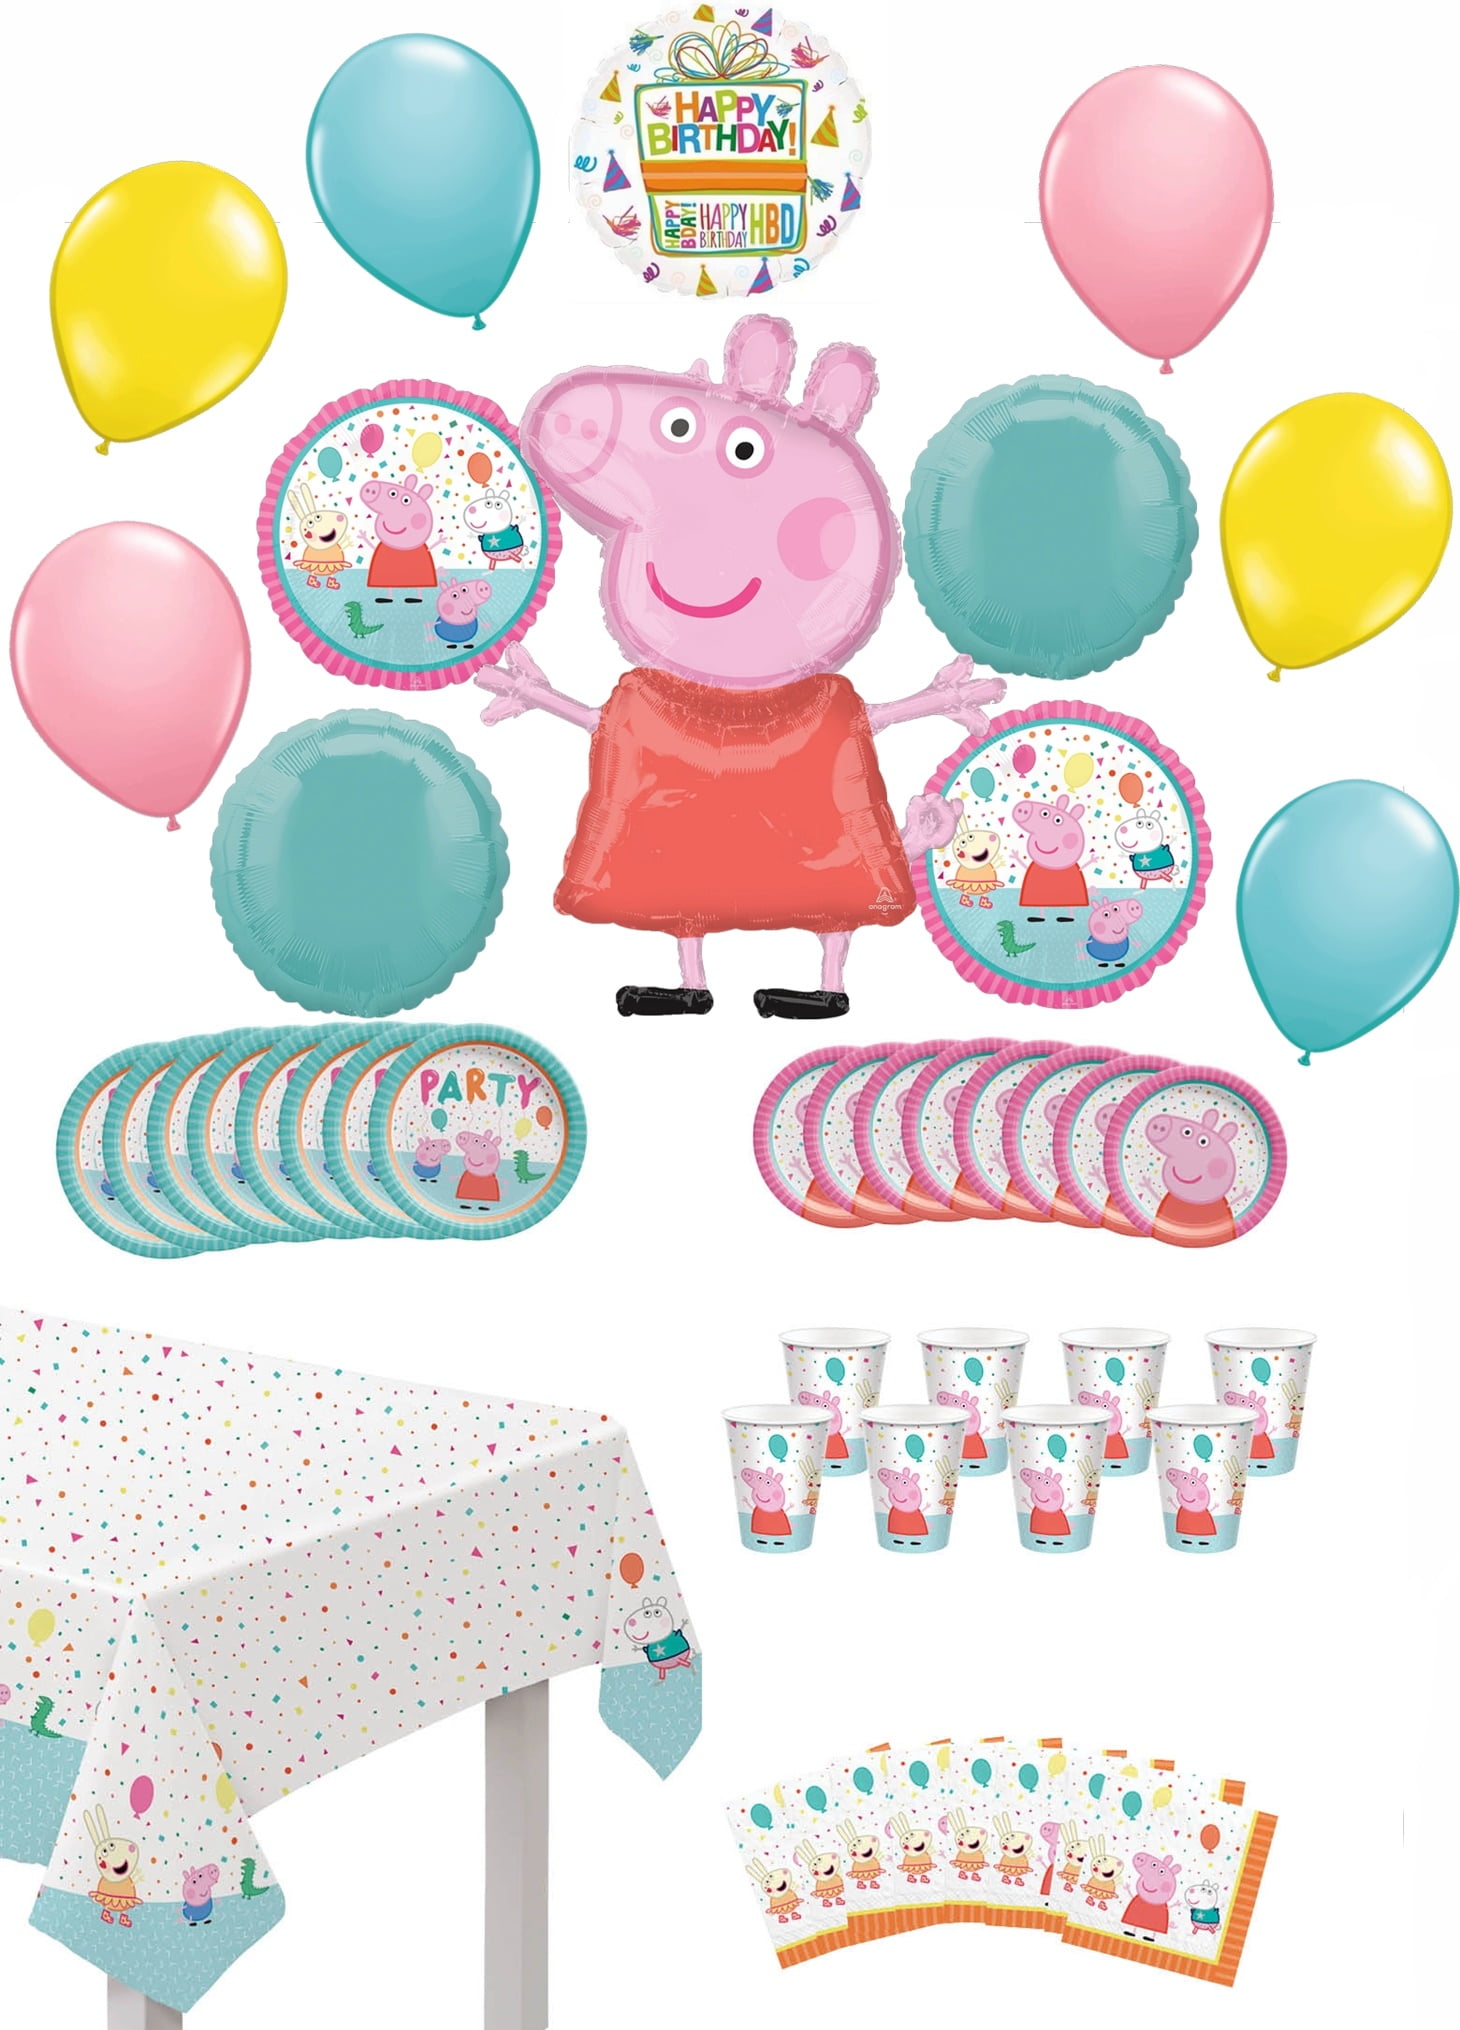 Party Favors for Boys and Girls Cupcake Toppers Latex Balloons 55pcs Peppa Pig Birthday Party Supplies for Kids Foil Balloon and Temporary Tattoos Cake Topper With Birthday Decorations Banner 